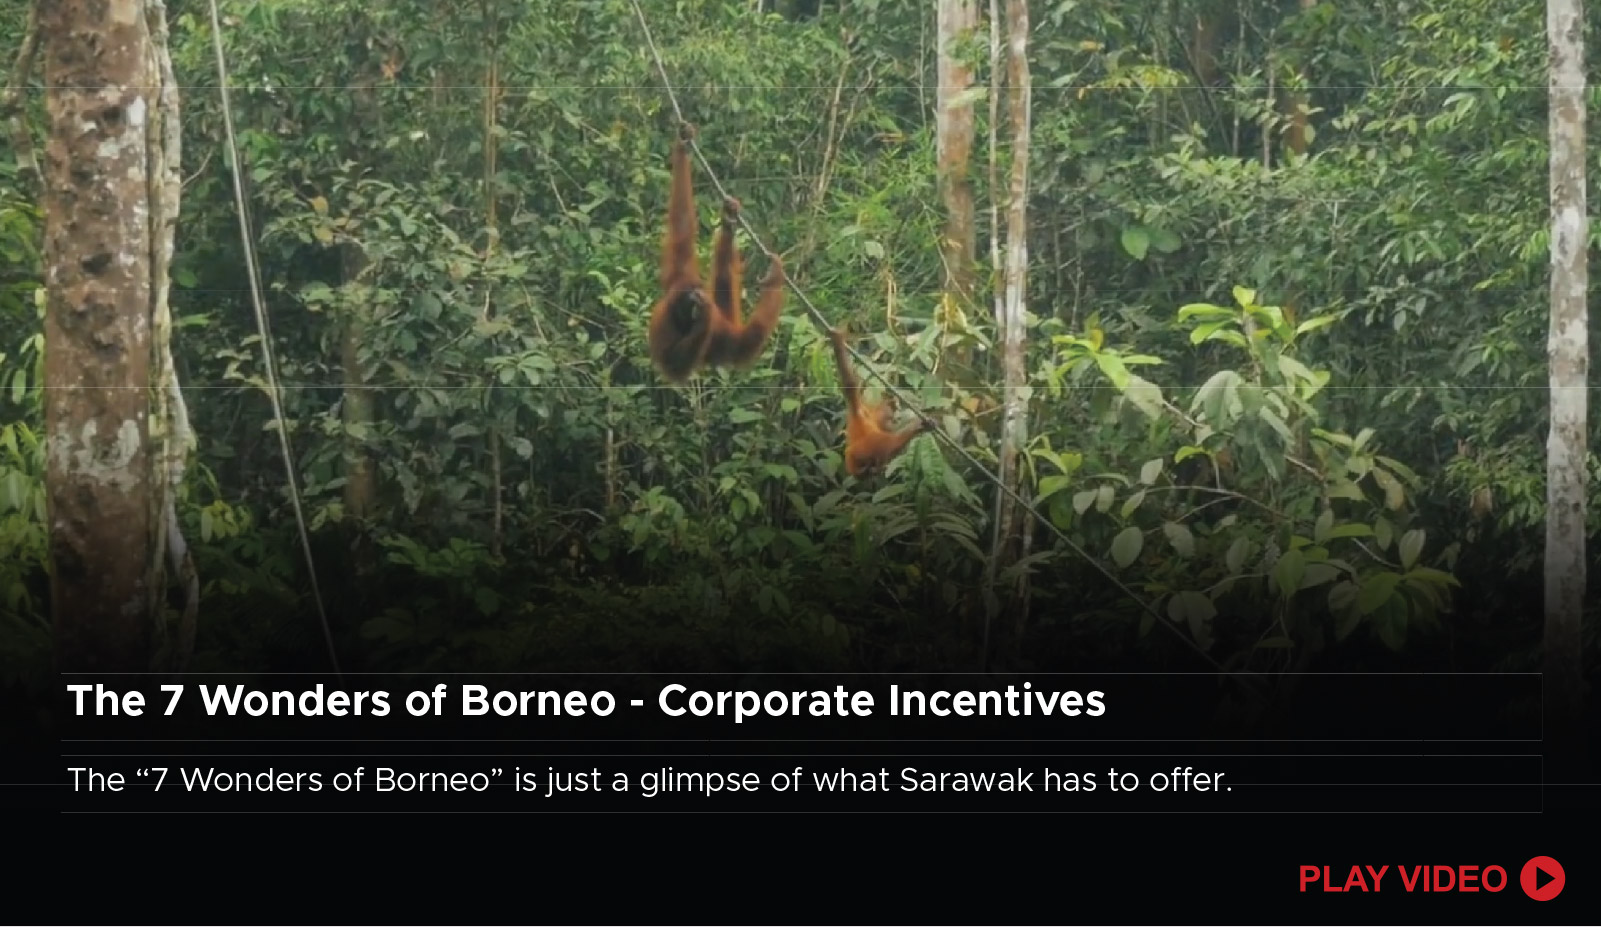 The 7 Wonders of Borneo - Corporate Incentives